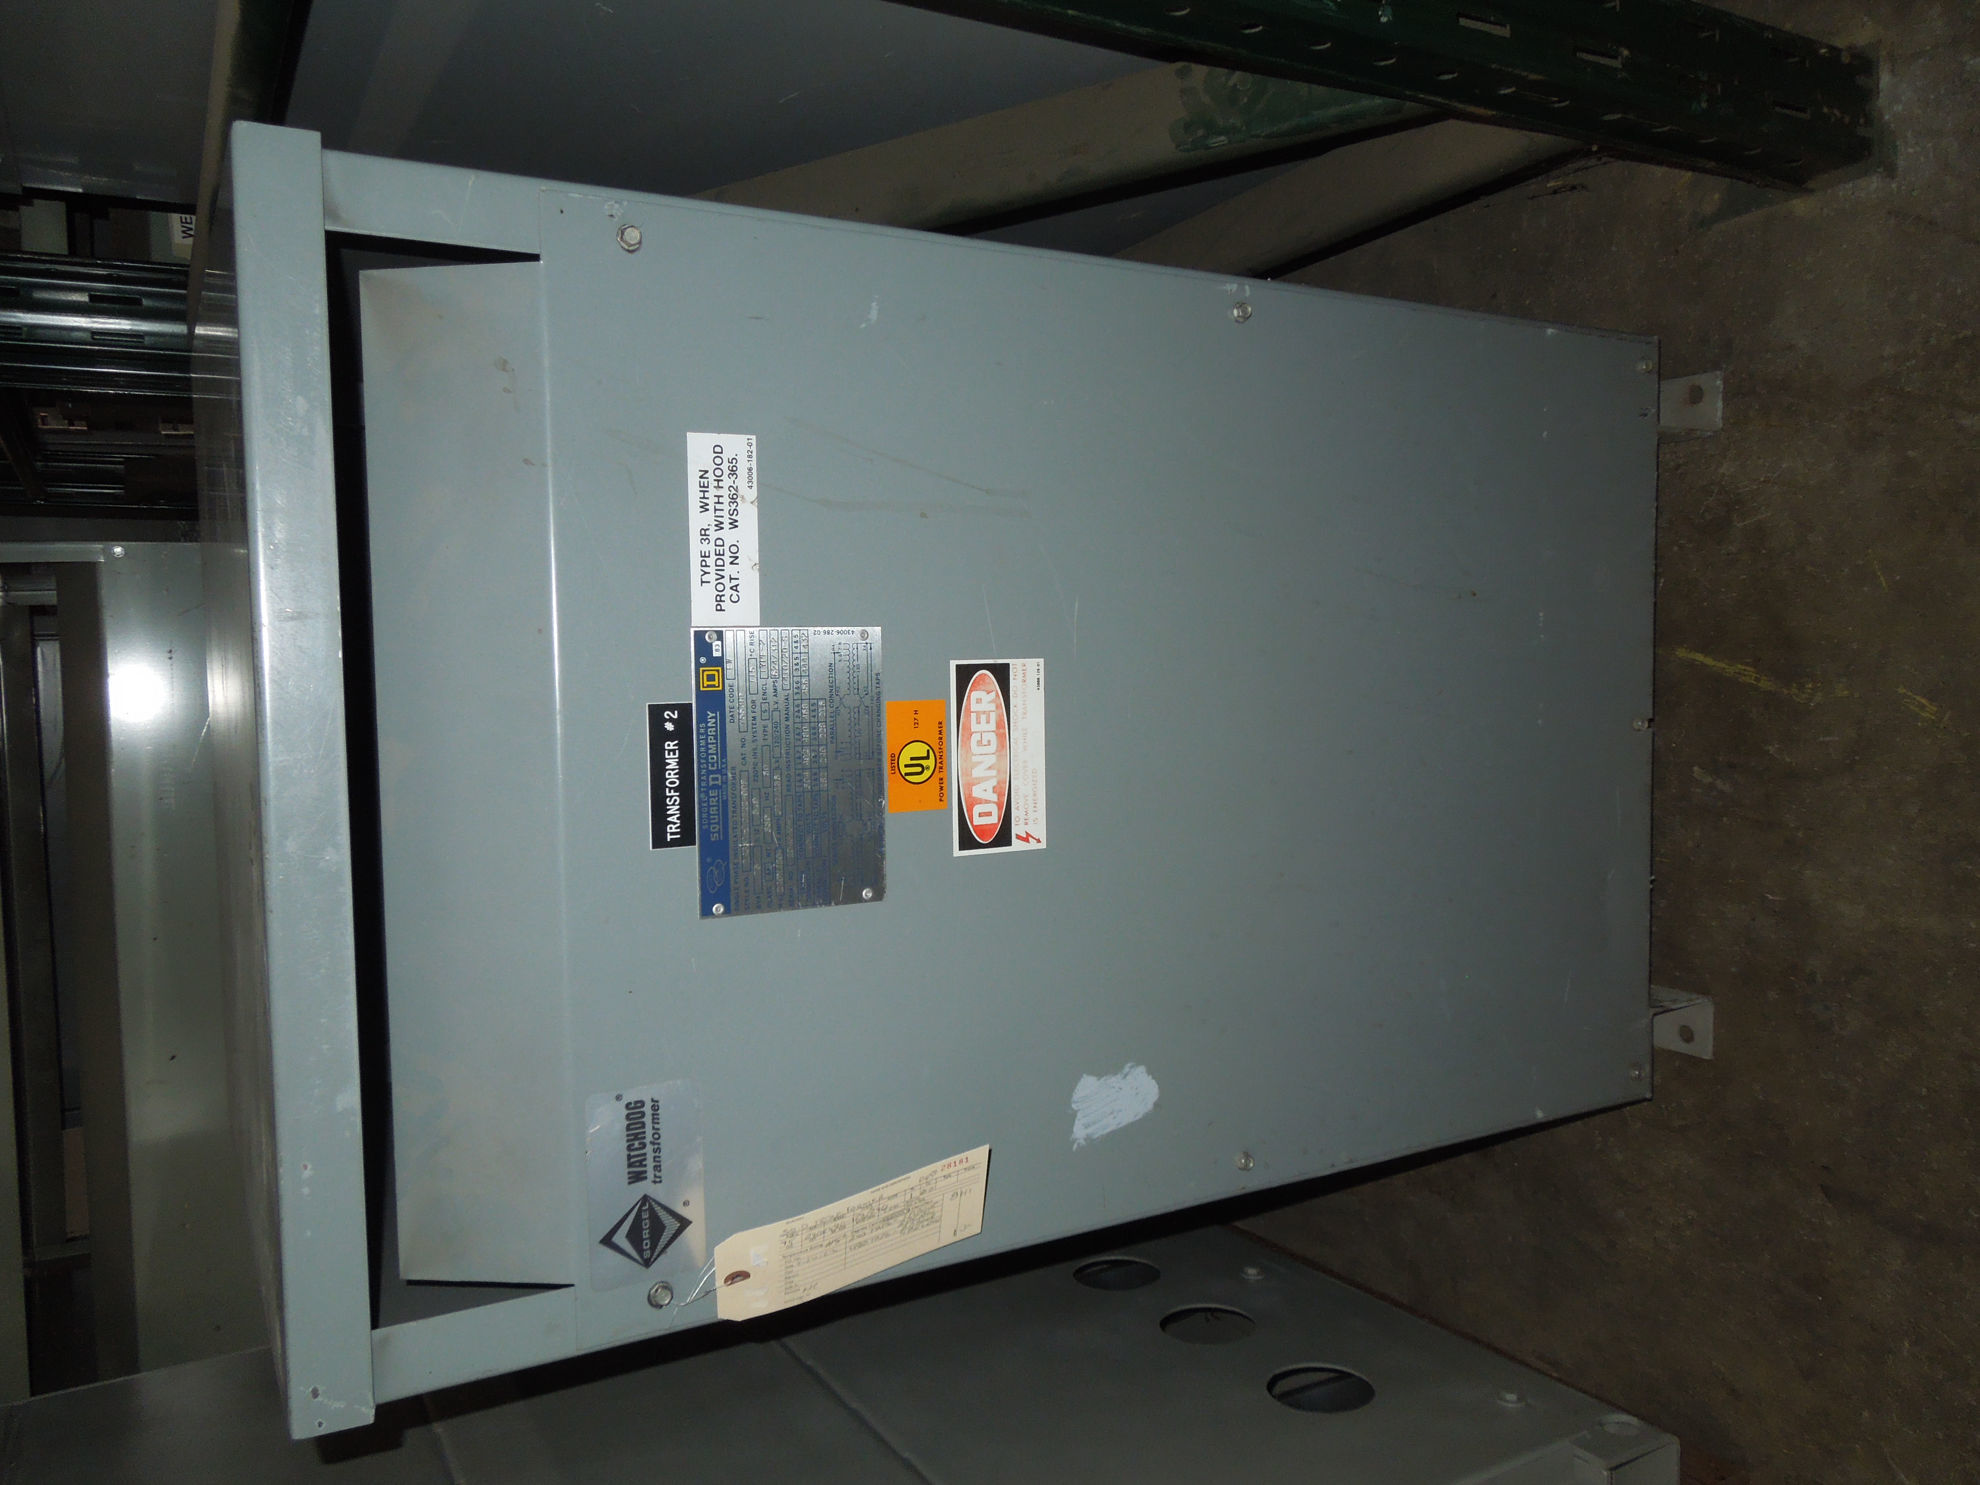 Picture of Square D 75 KVA 240x480-120/240 Volt 1 Phase Low Voltage Dry Type Transformer R&G